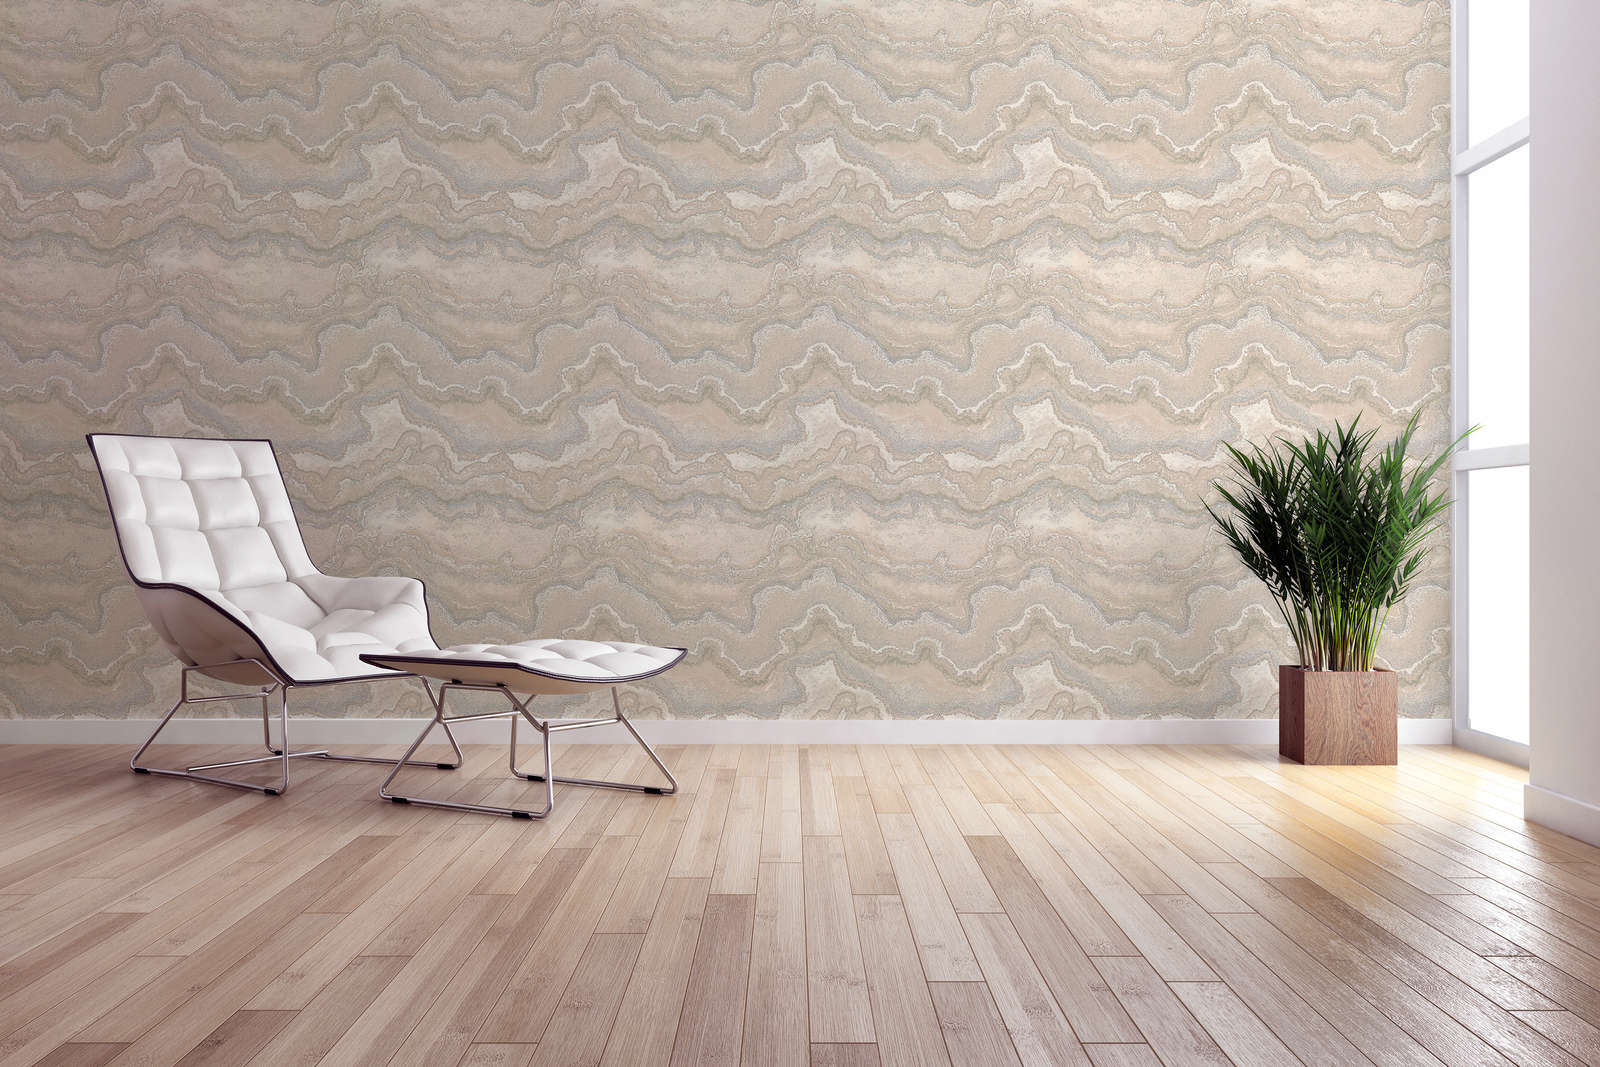             Non-woven wallpaper with textured marbling - beige, cream, silver
        